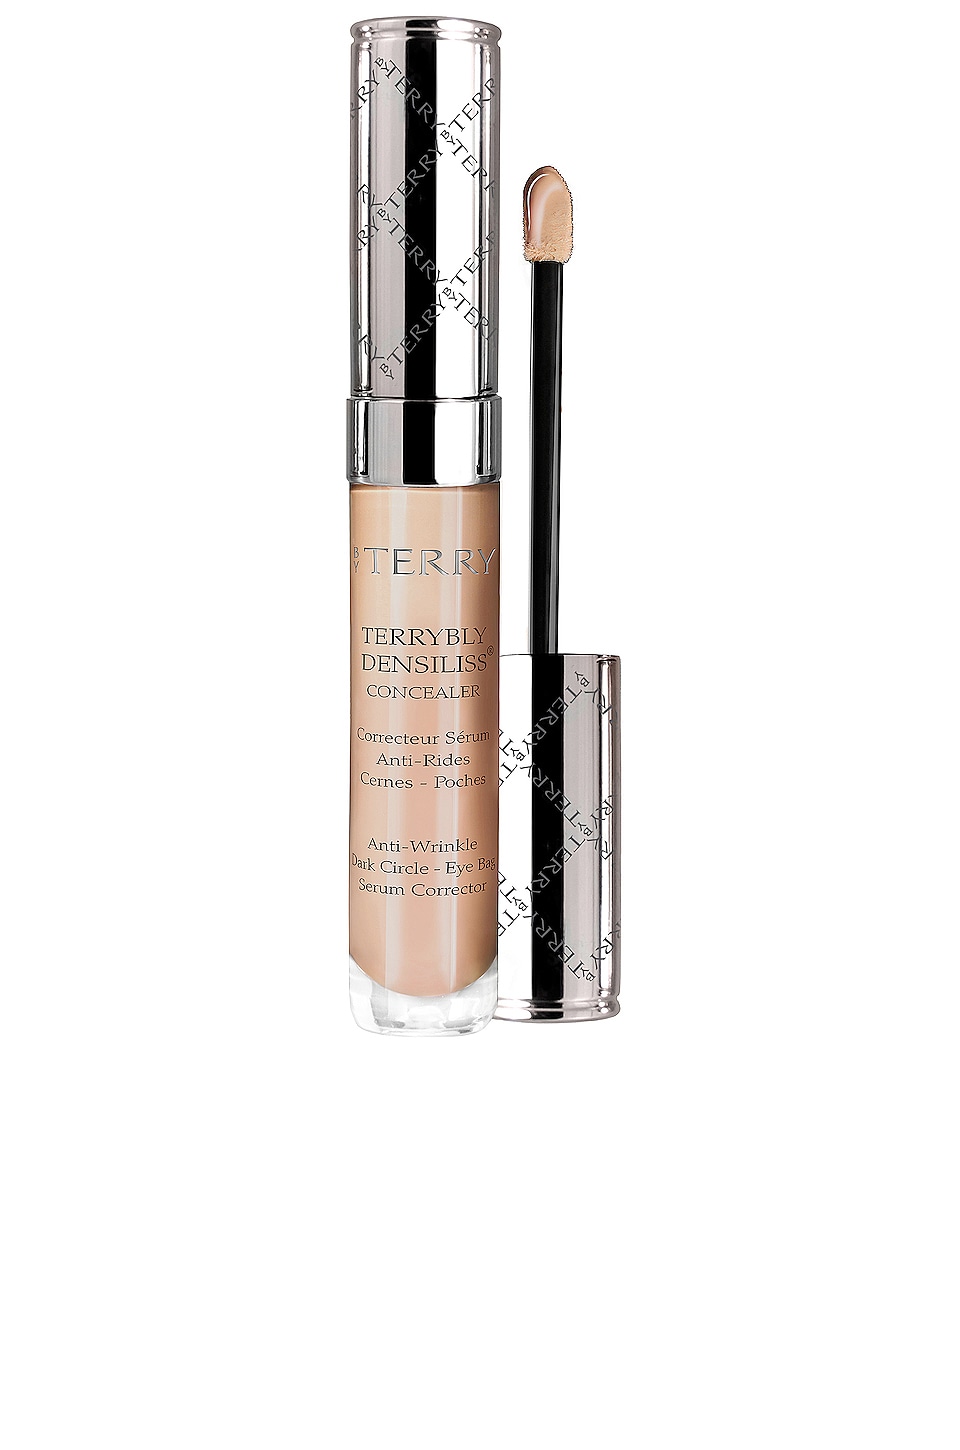 Консилер By Terry Terrybly Densiliss, цвет Desert Beige by terry консилер terrybly densiliss concealer оттенок 6 sienna coper